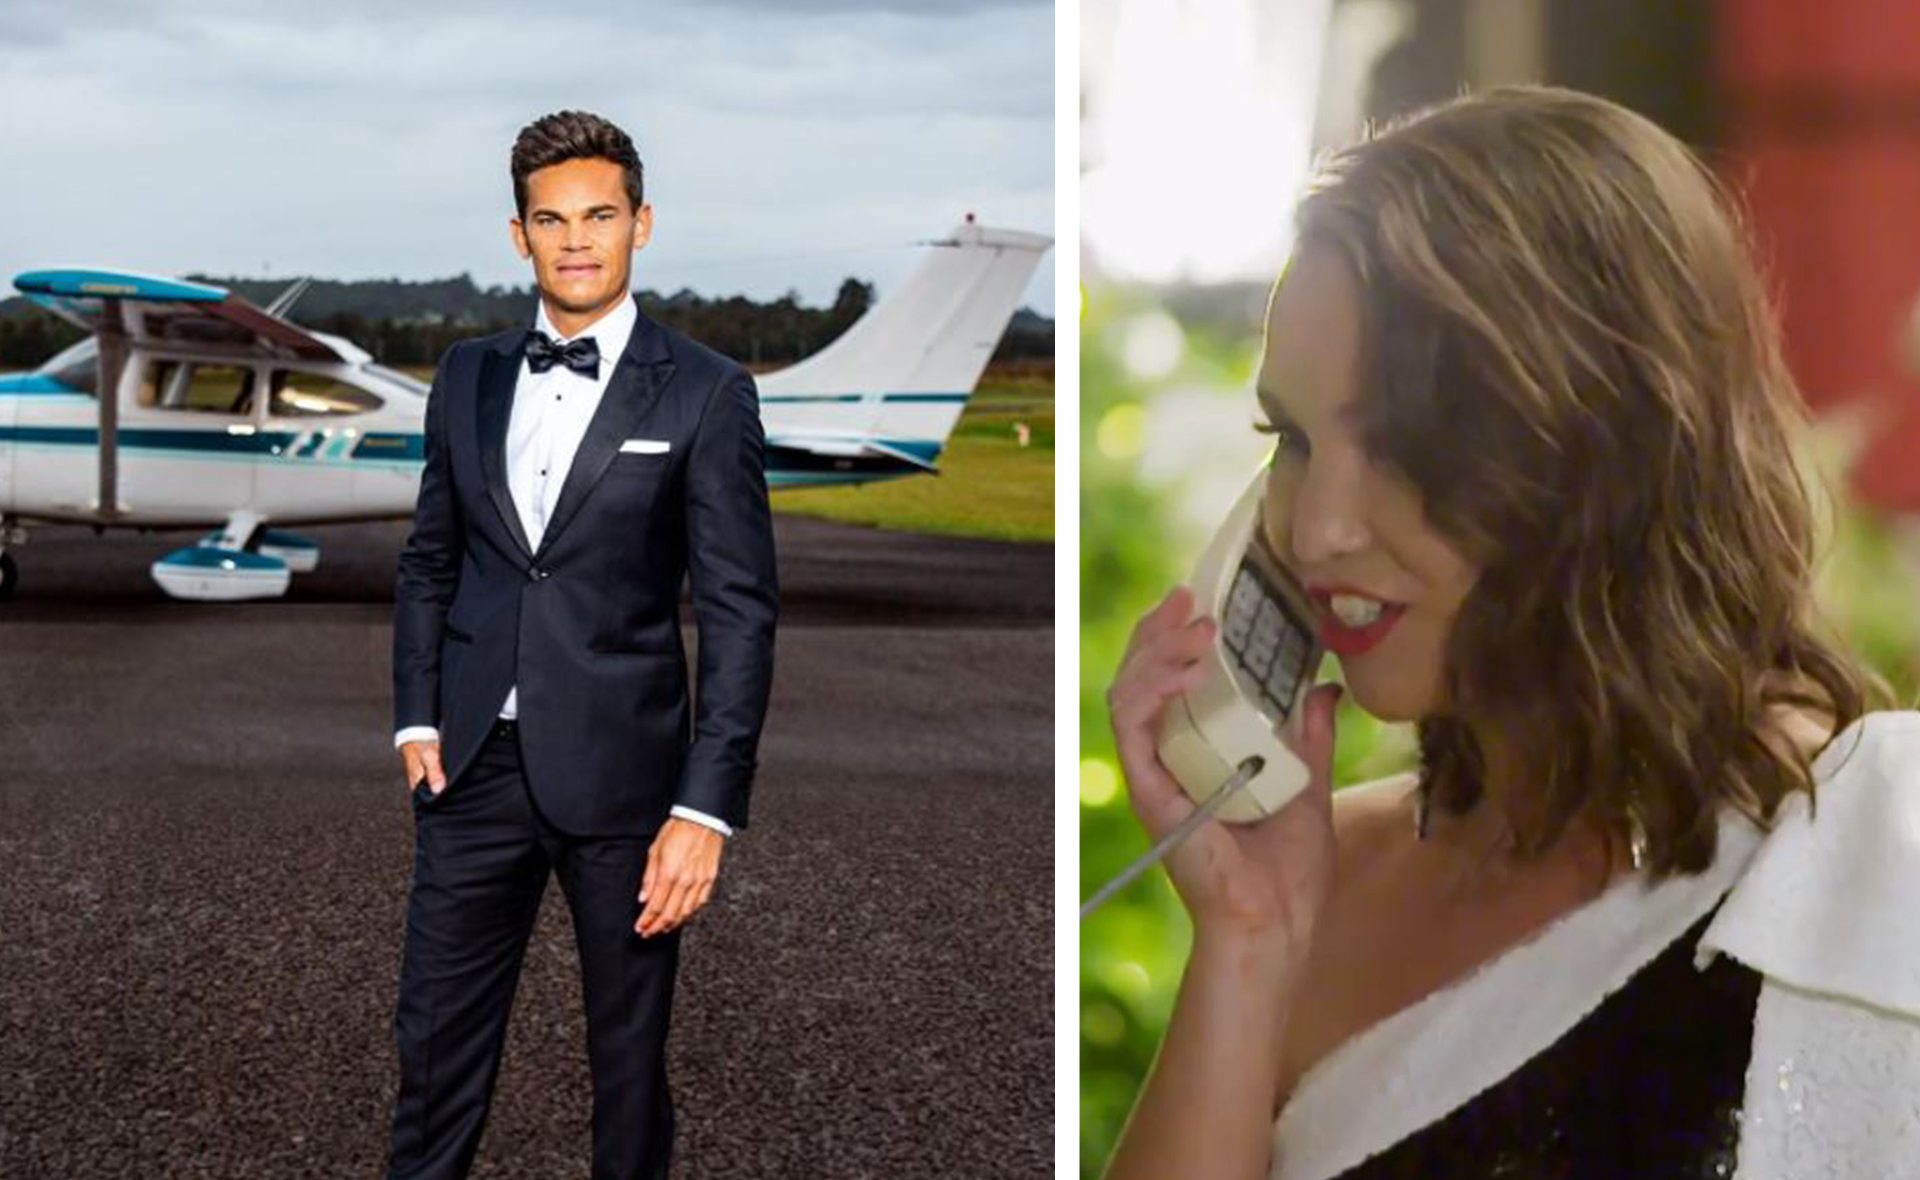 Meet Chanel, the first passenger boarding pilot Jimmy’s flight for love on The Bachelor 2021